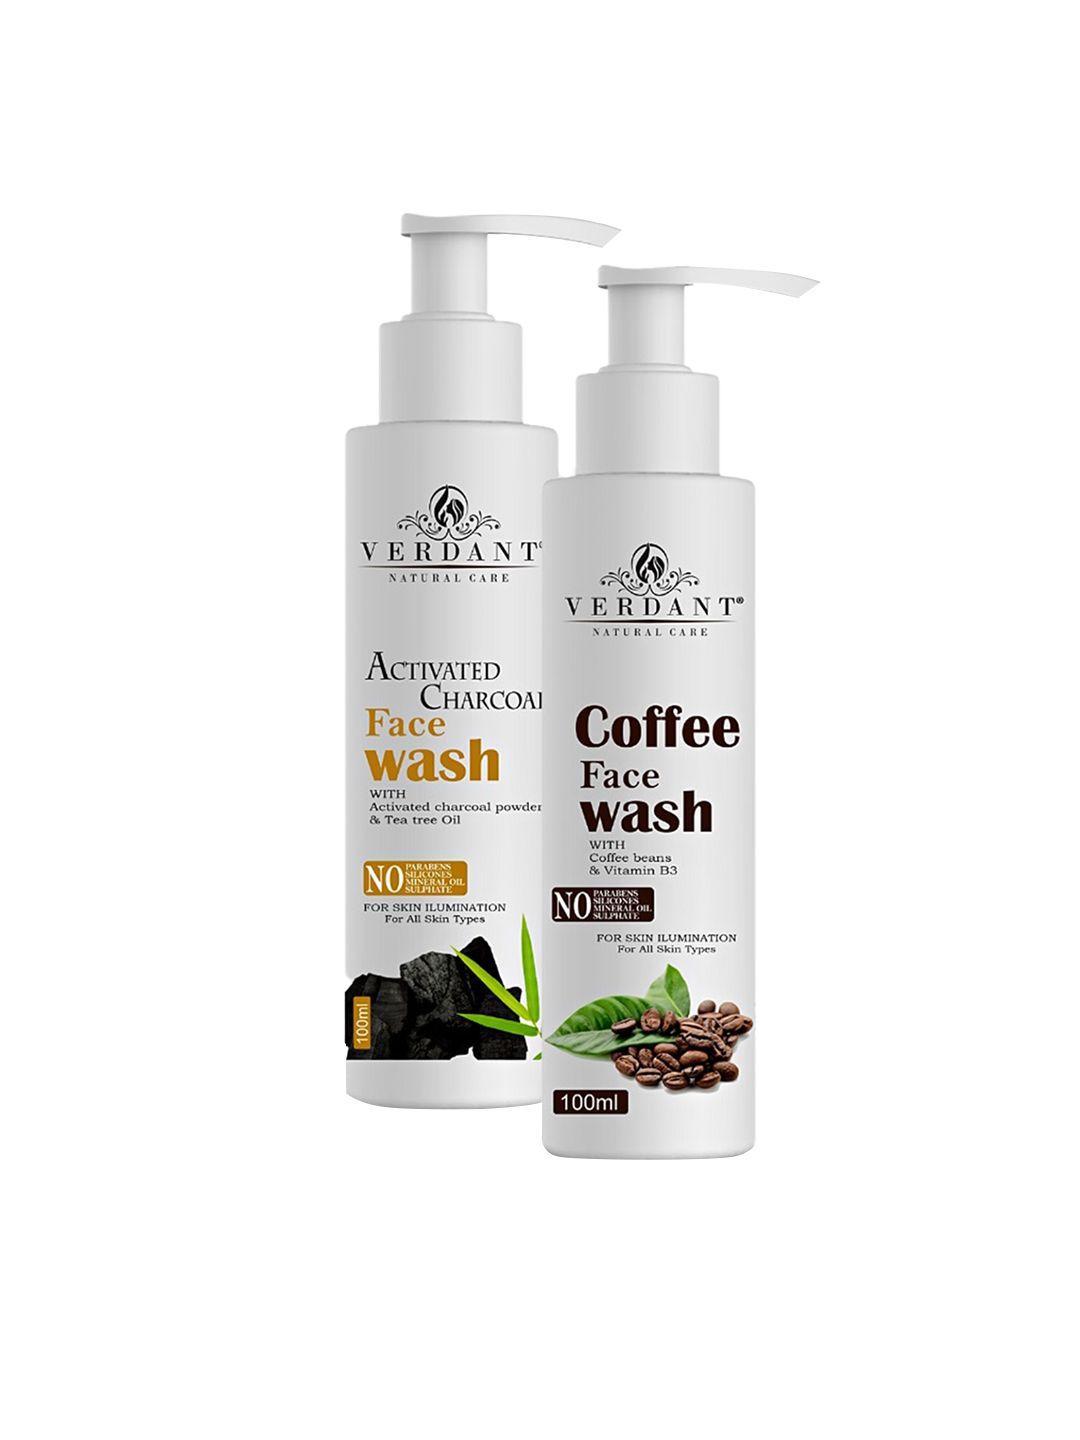 verdant natural care set of 2 activated charcoal & coffee face washes - 100 ml each